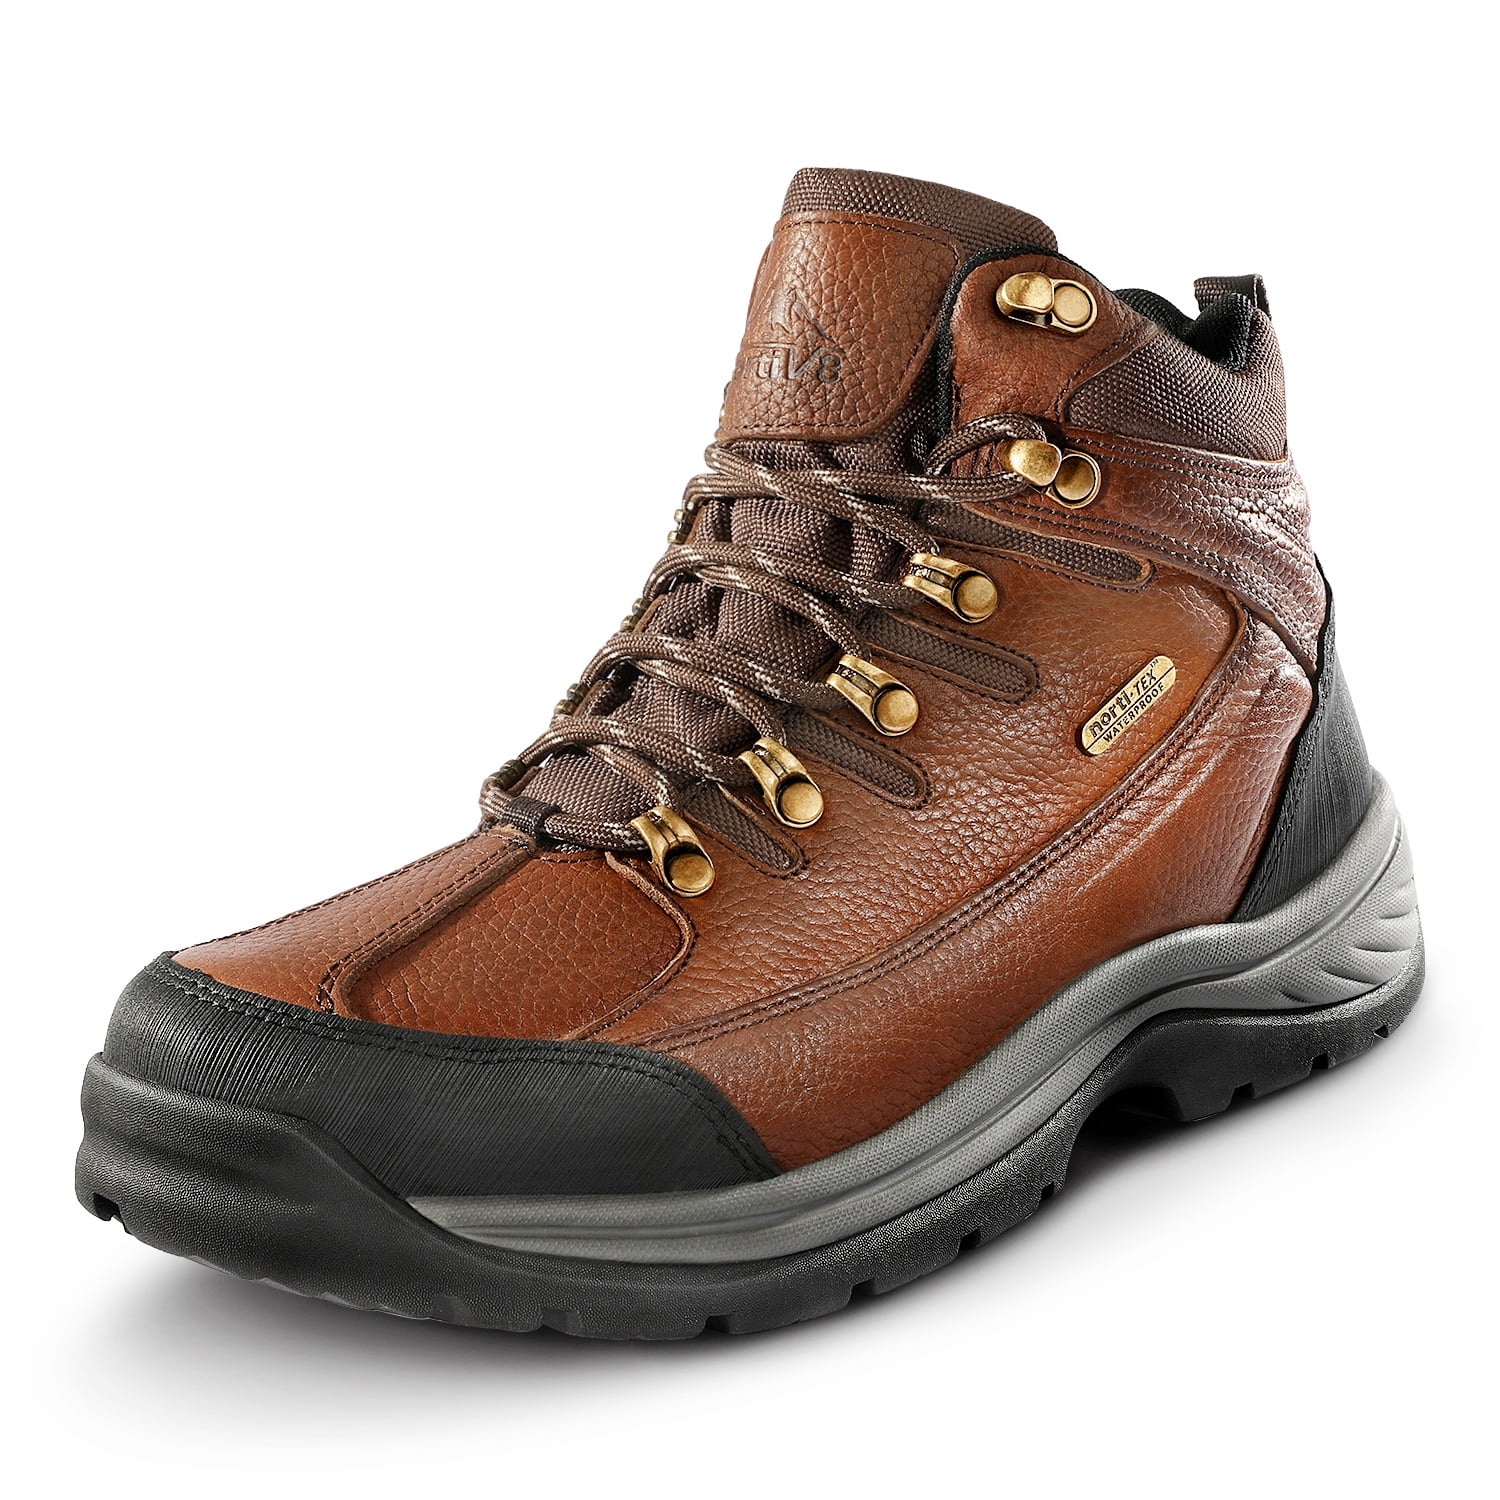 NORTIV 8 Men's Hiking Boots Mid Ankle Leather Waterproof Outdoor Boots ...